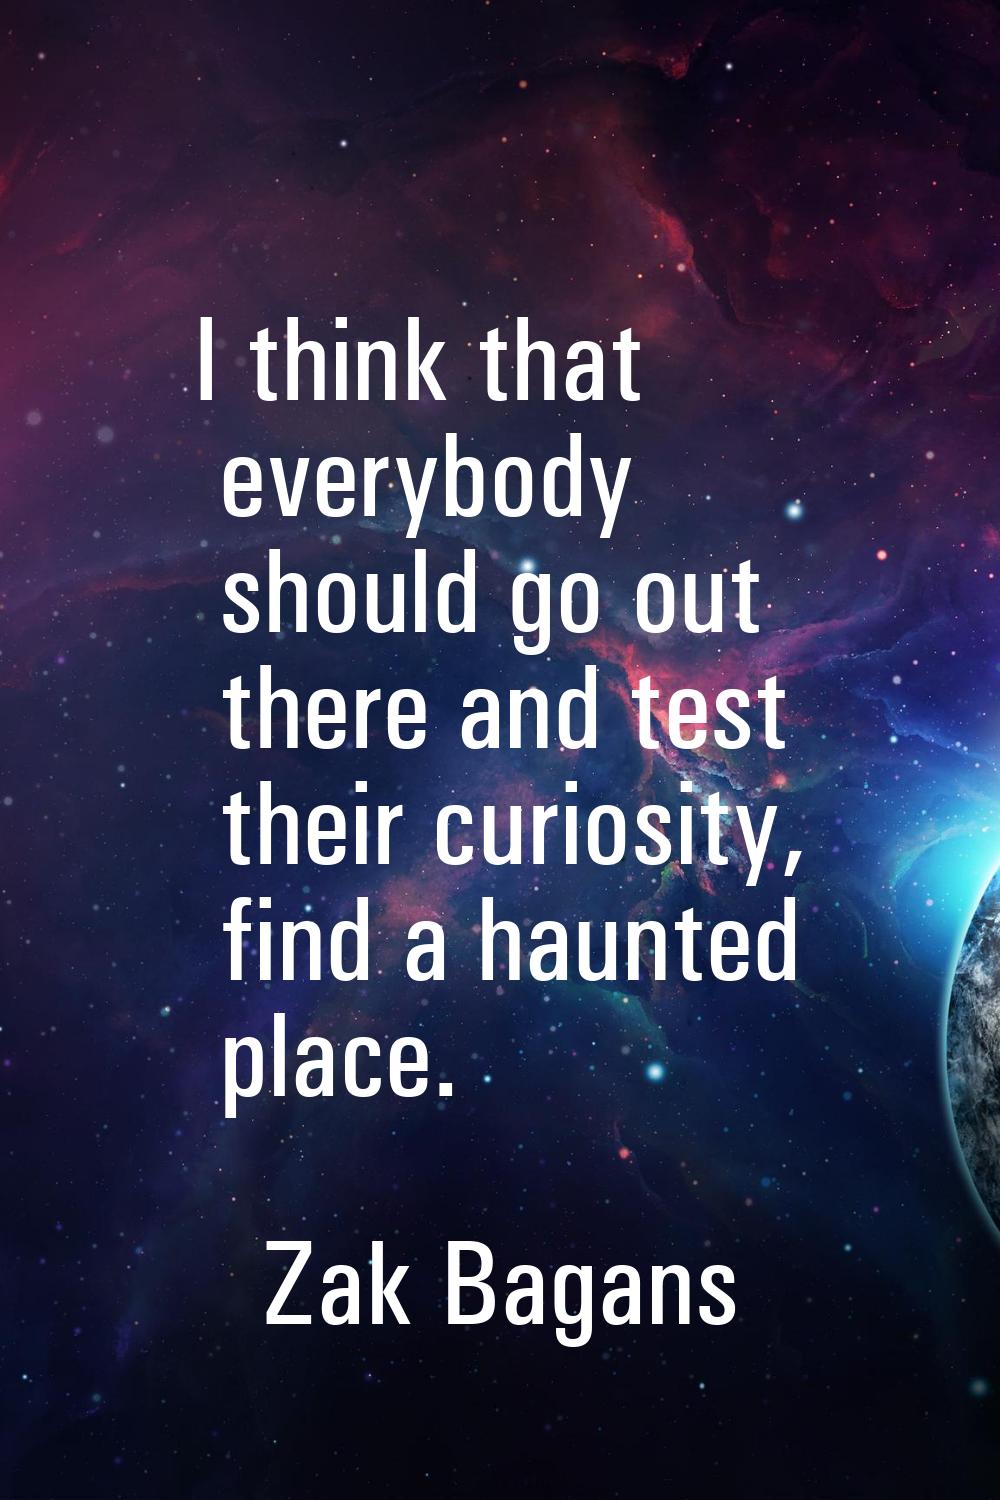 I think that everybody should go out there and test their curiosity, find a haunted place.